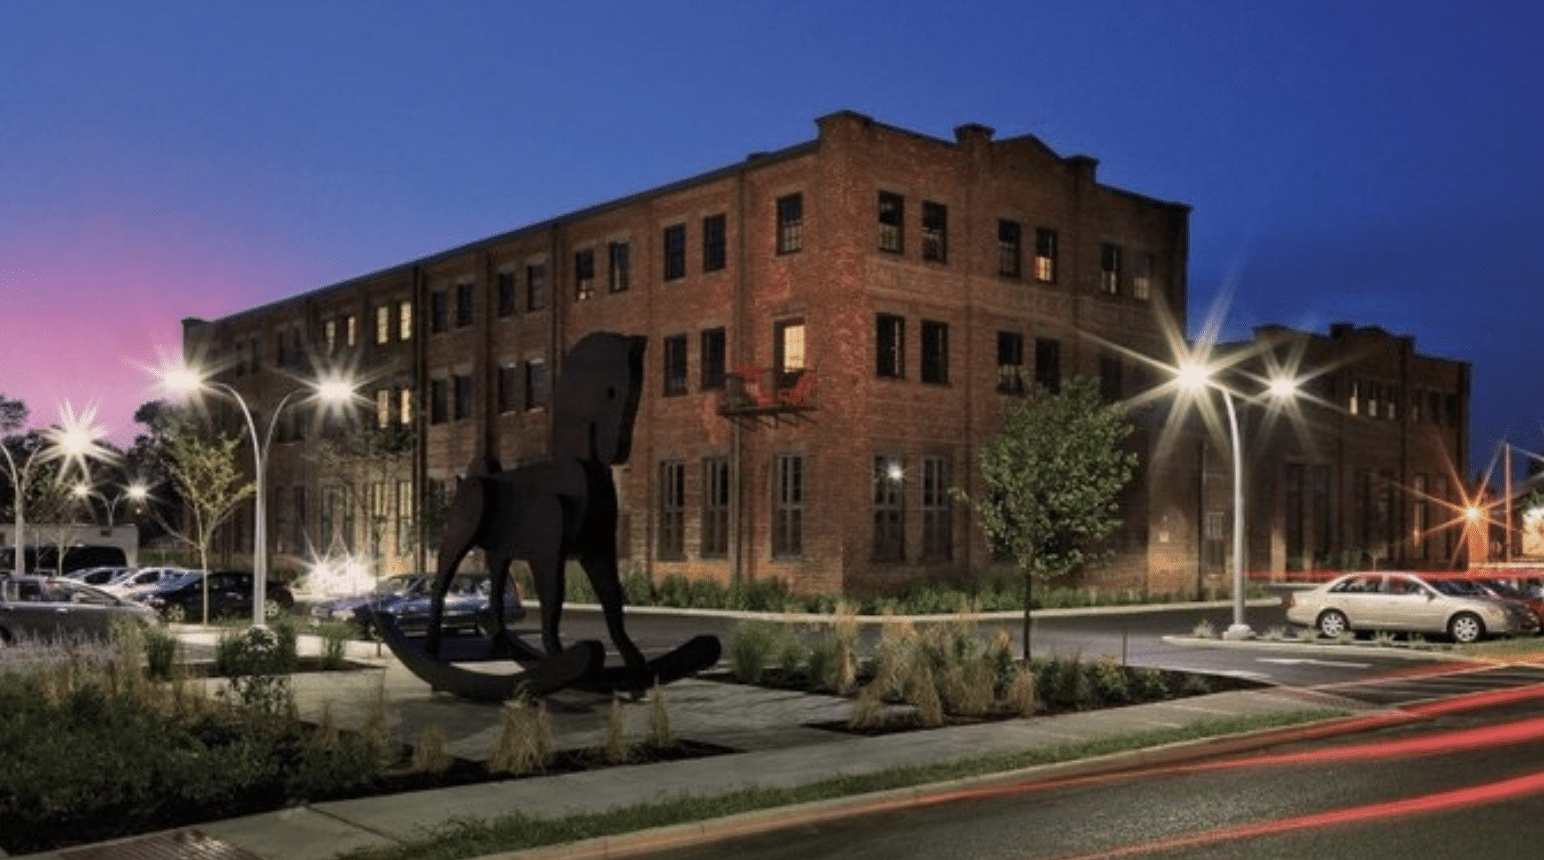 Large metal wooden horse public art in front of brick building around a parking lot in an urban area